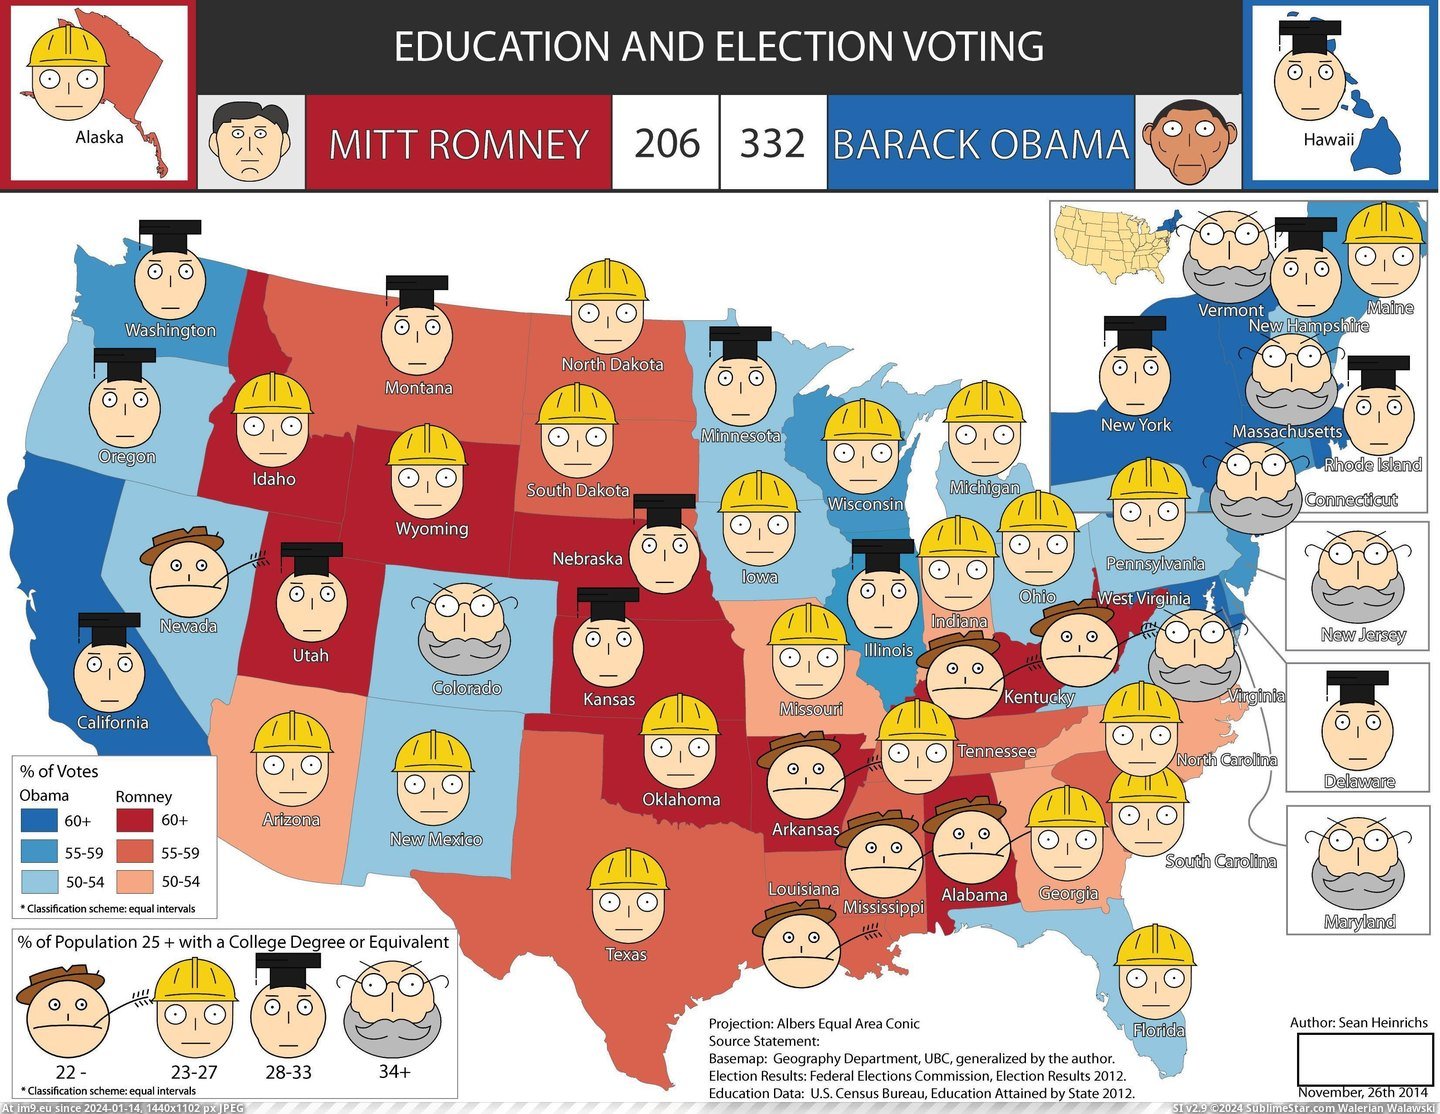 #Class #Final #Education #Voting #Cartography #Project #Election [Mapporn] My final project in my cartography class: Education and Election Voting [3304x2541] [OC] Pic. (Image of album My r/MAPS favs))